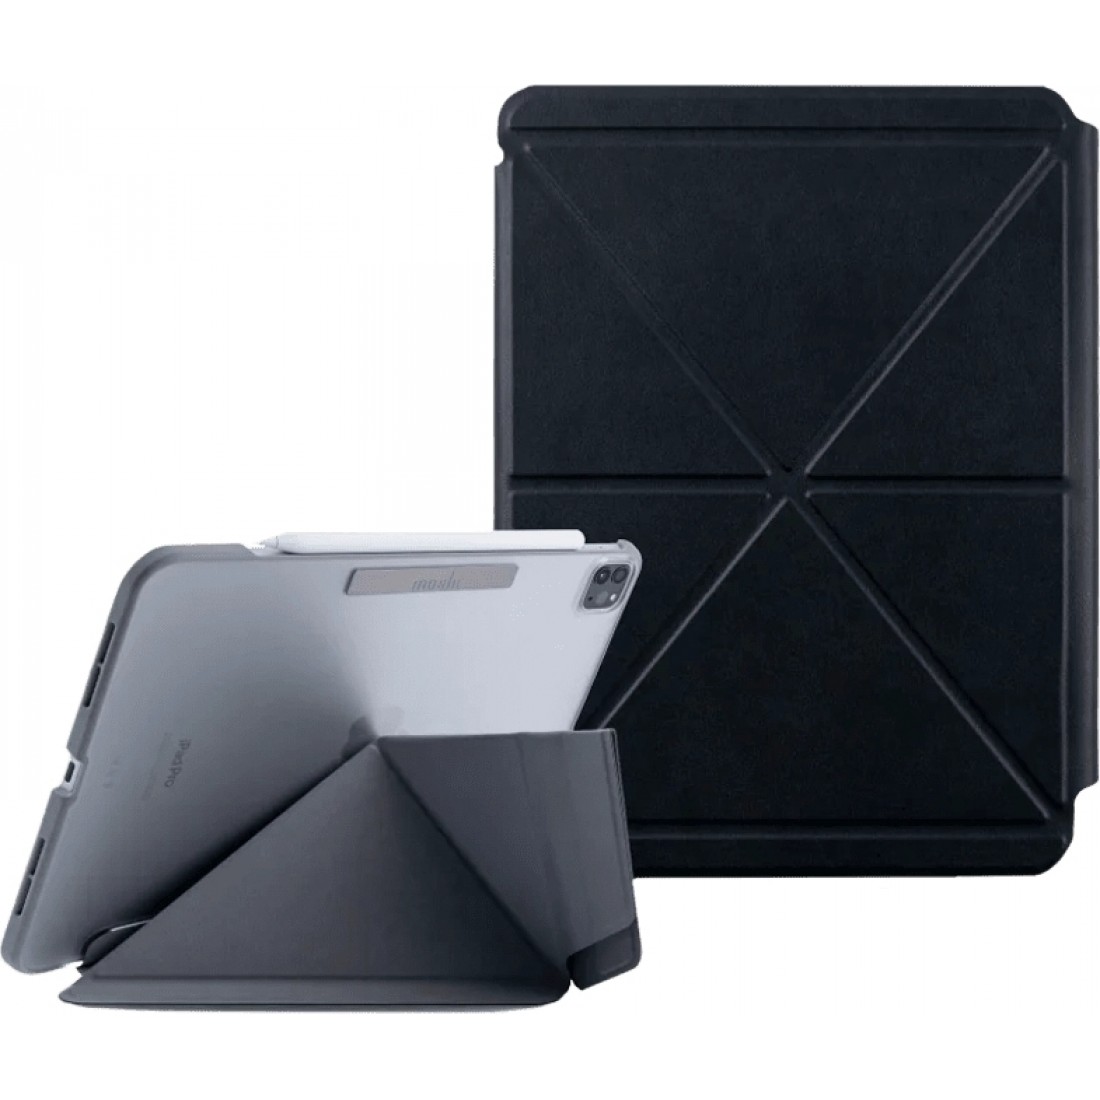 Moshi VersaCover Case with Folding Cover Charcoal Black for iPad Pro 11" (4th-1st Gen) (99MO231601)